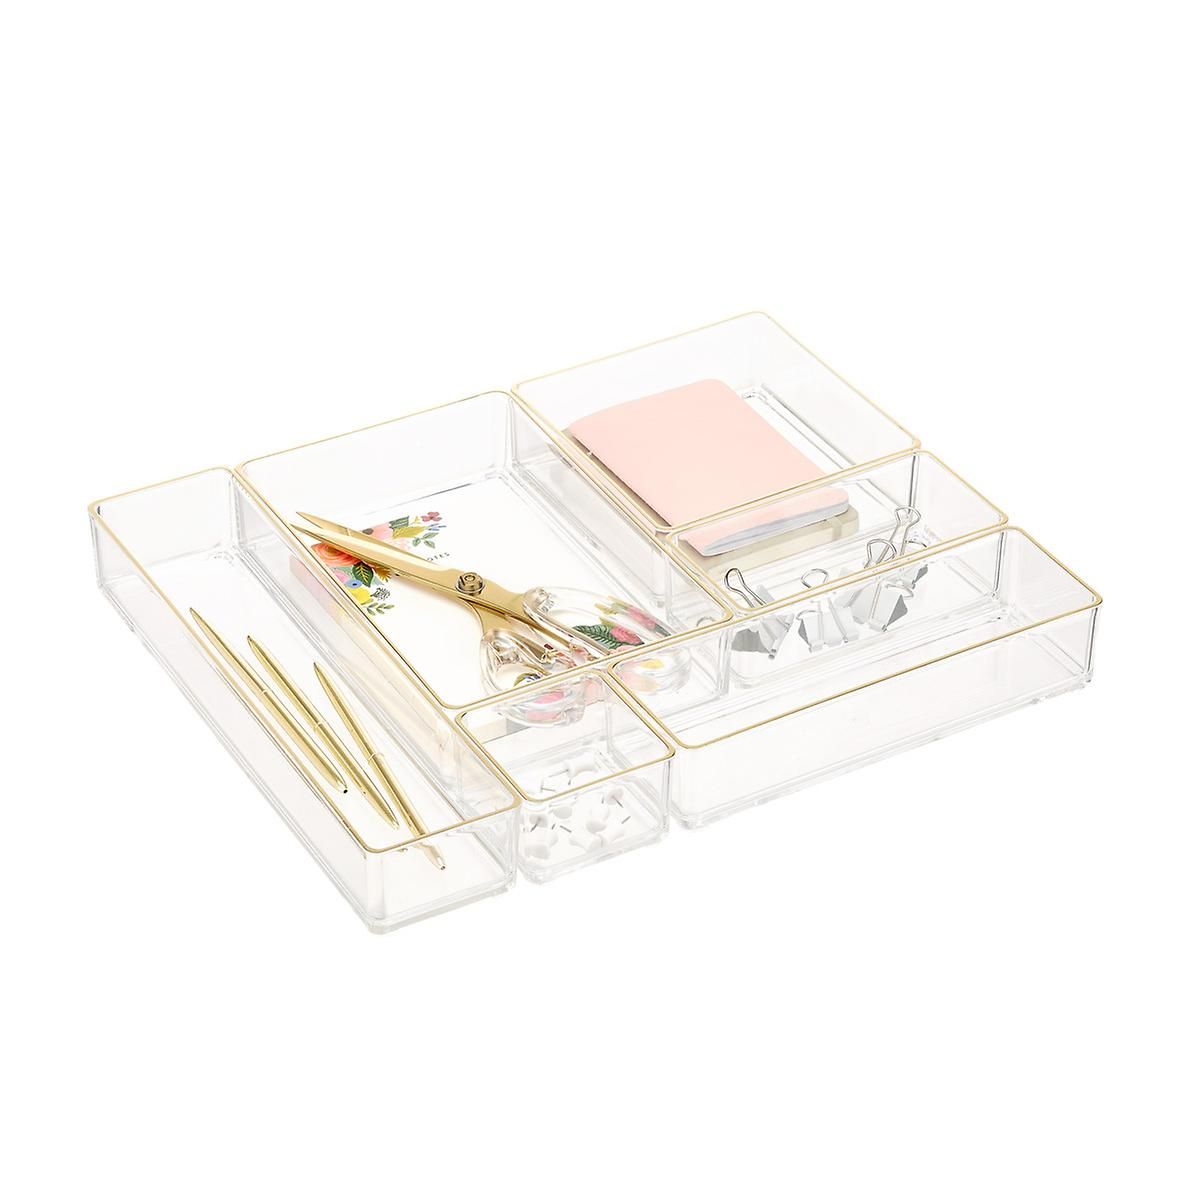 Clear Acrylic Stackable Drawer Organizers Gold Trim Set of 6 | The Container Store